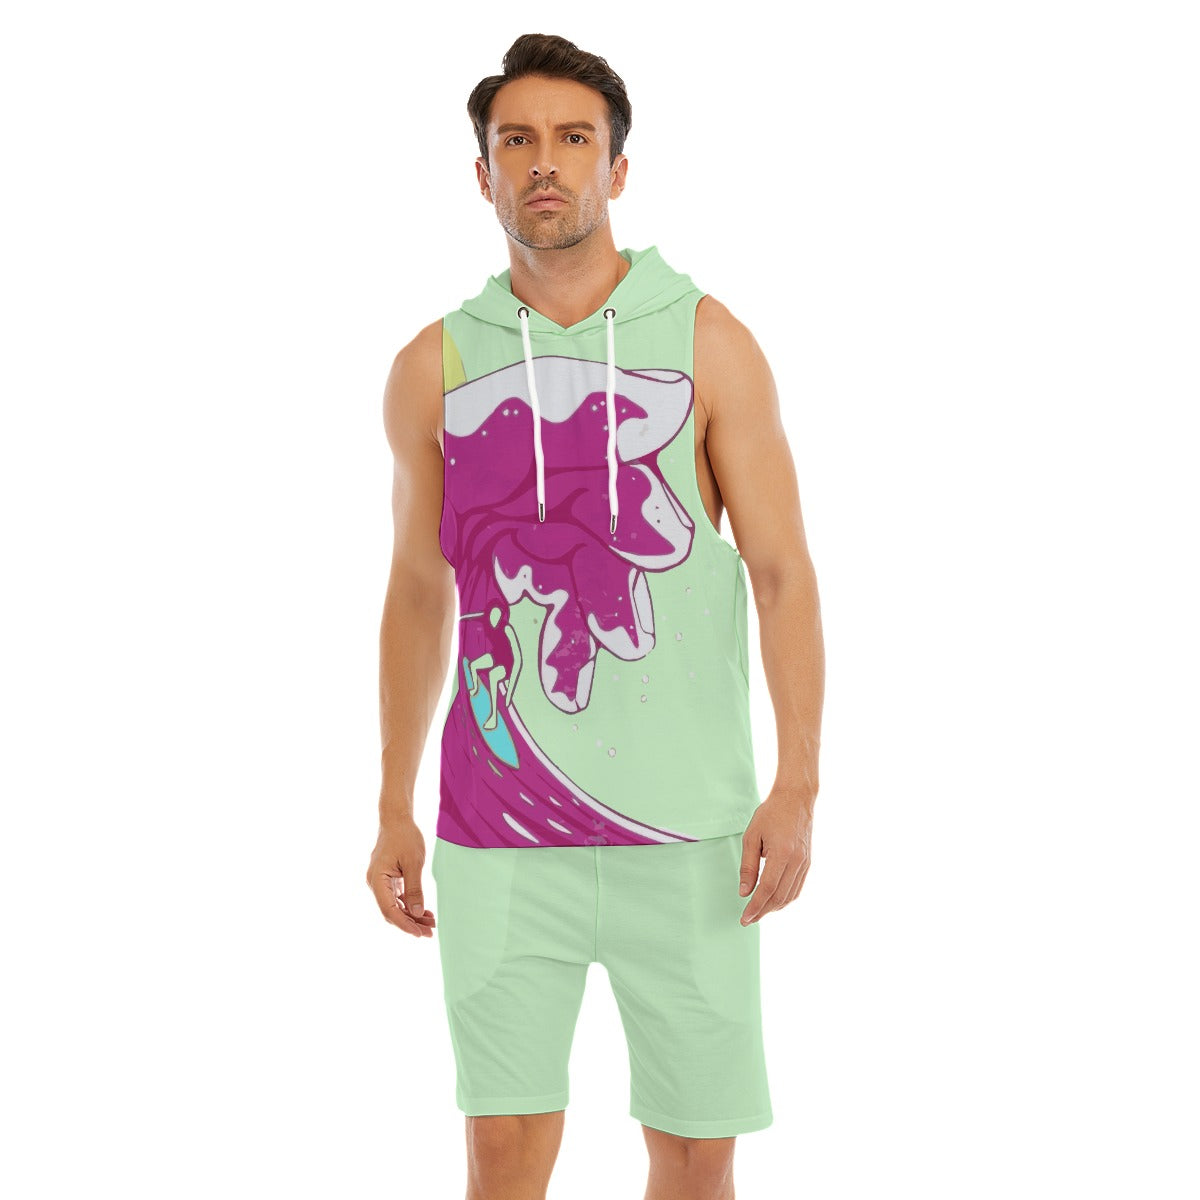 In the Ocean's hand Sleeveless semi stringer hooded tank And Shorts Sets